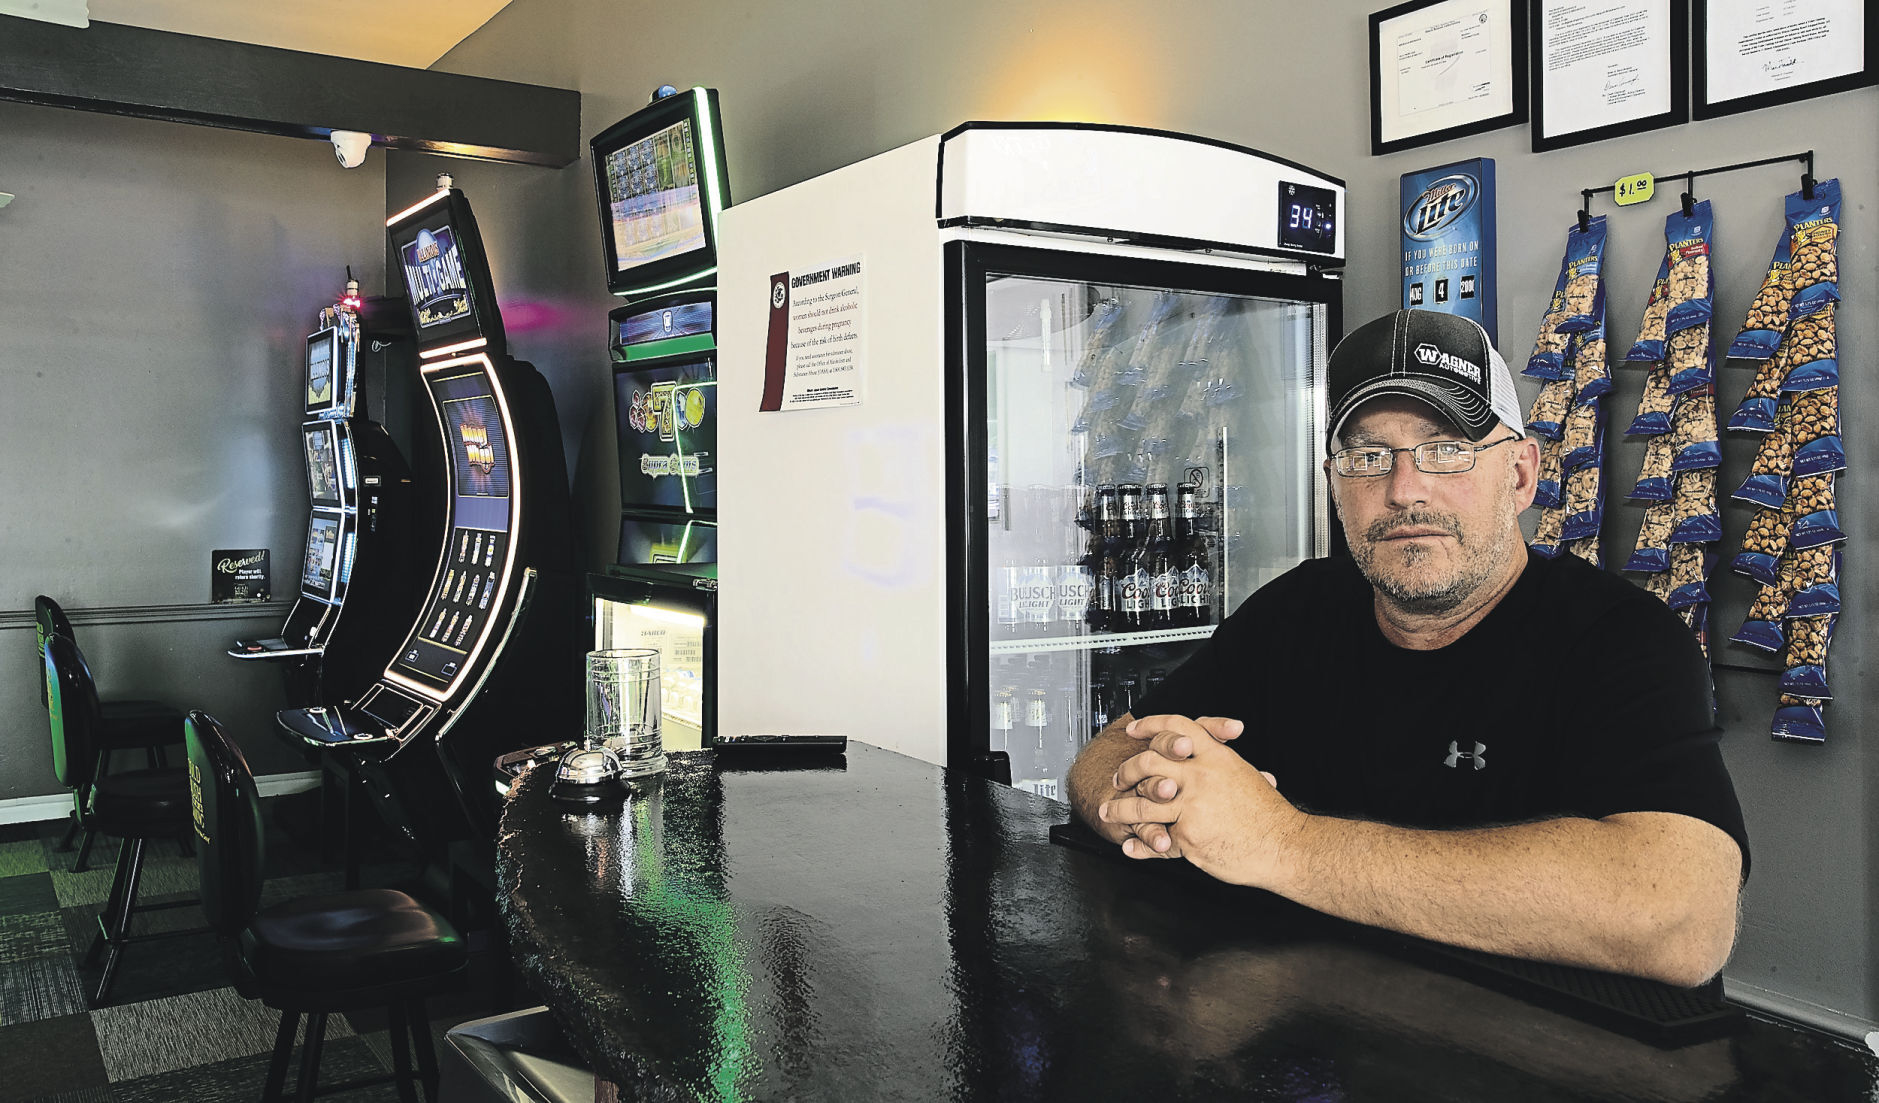 Paul Broshous sits behind the bar at Broshous Brewhous in Stockton, Ill. The gaming parlor opened on July 29.    PHOTO CREDIT: Stephen Gassman